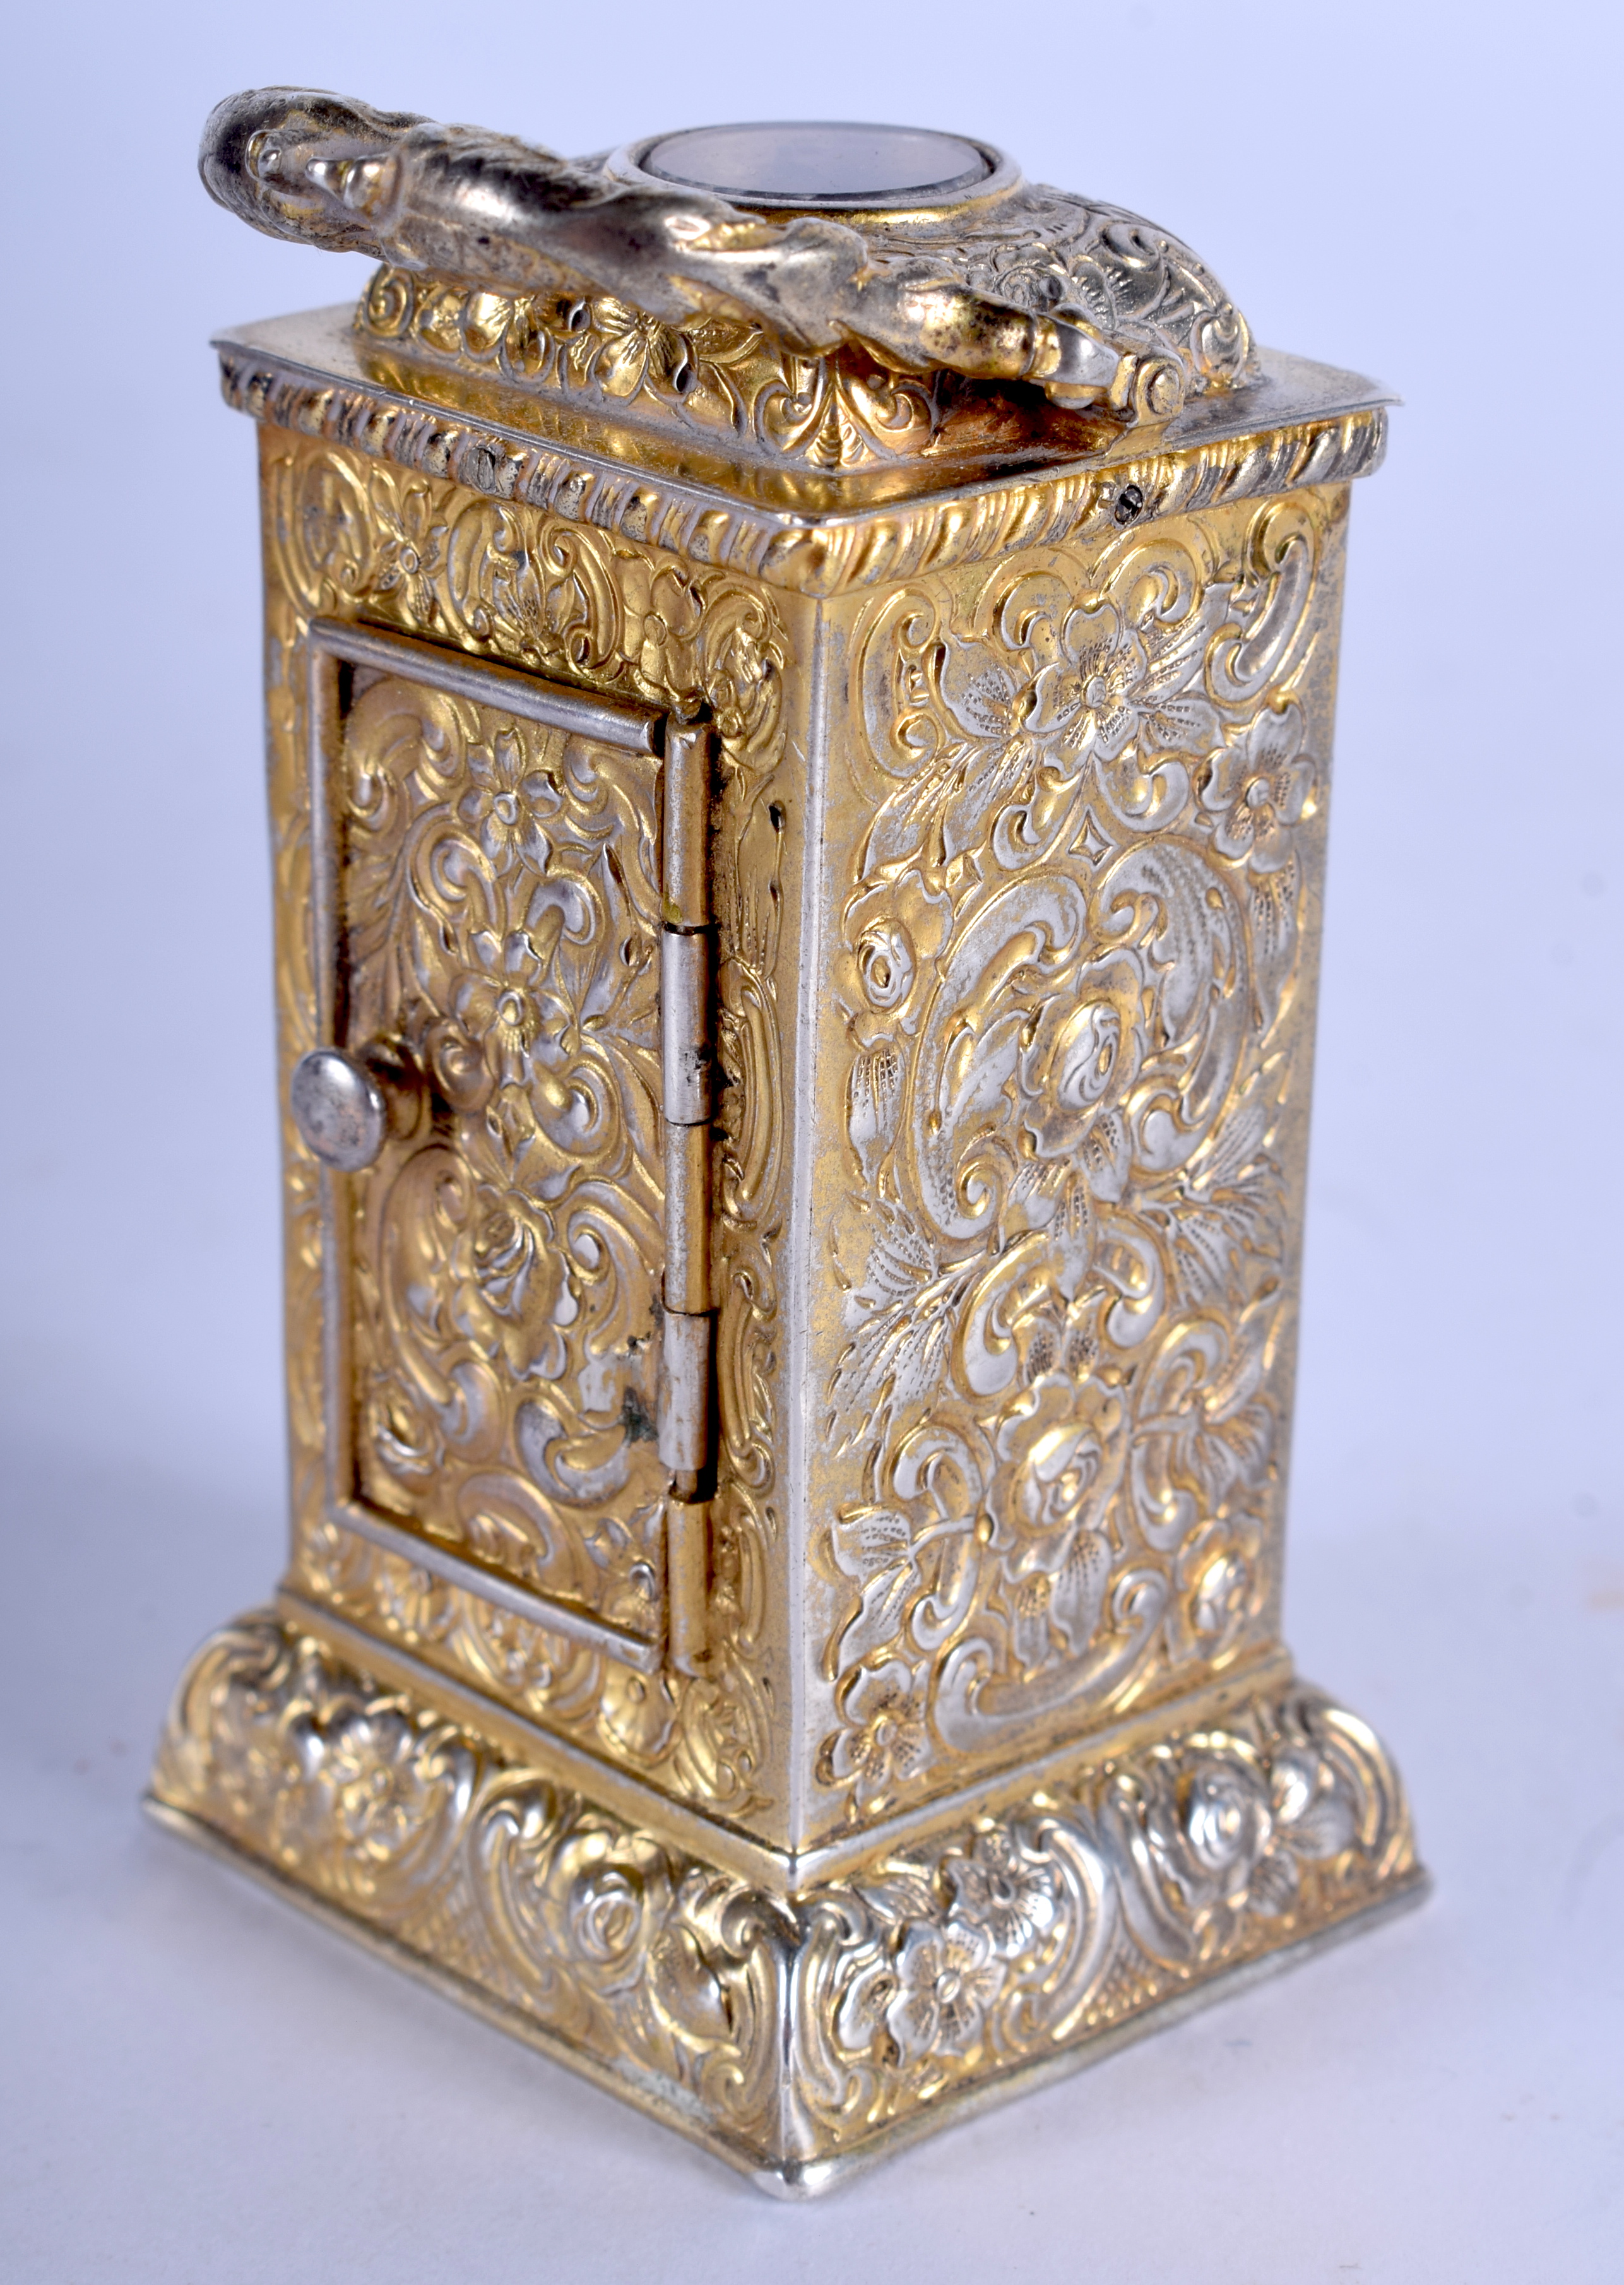 A LOVELY ANTIQUE MINIATURE TRAVELLING SILVER GILT CLOCK decorated with foliage and vines. 8.75 cm hi - Image 4 of 8